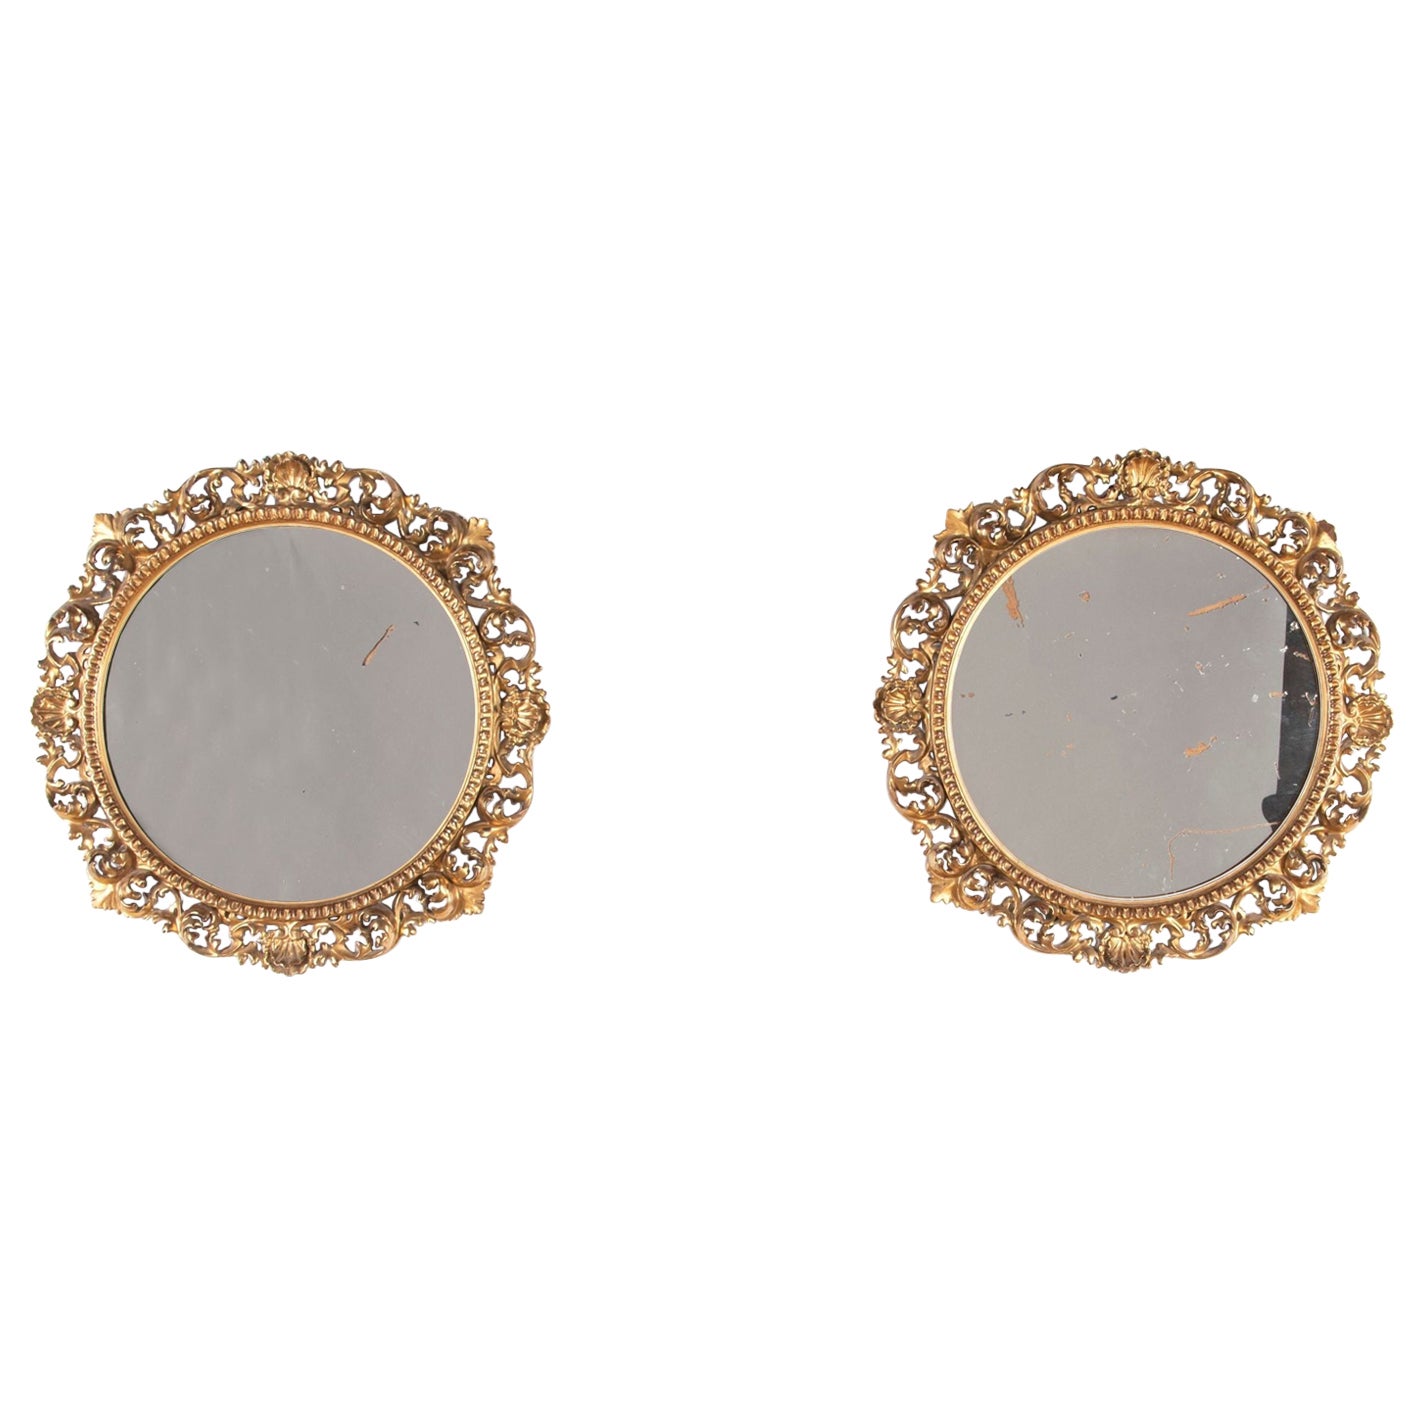 Pair of Circular Florentine Mirrors by Maples Co.